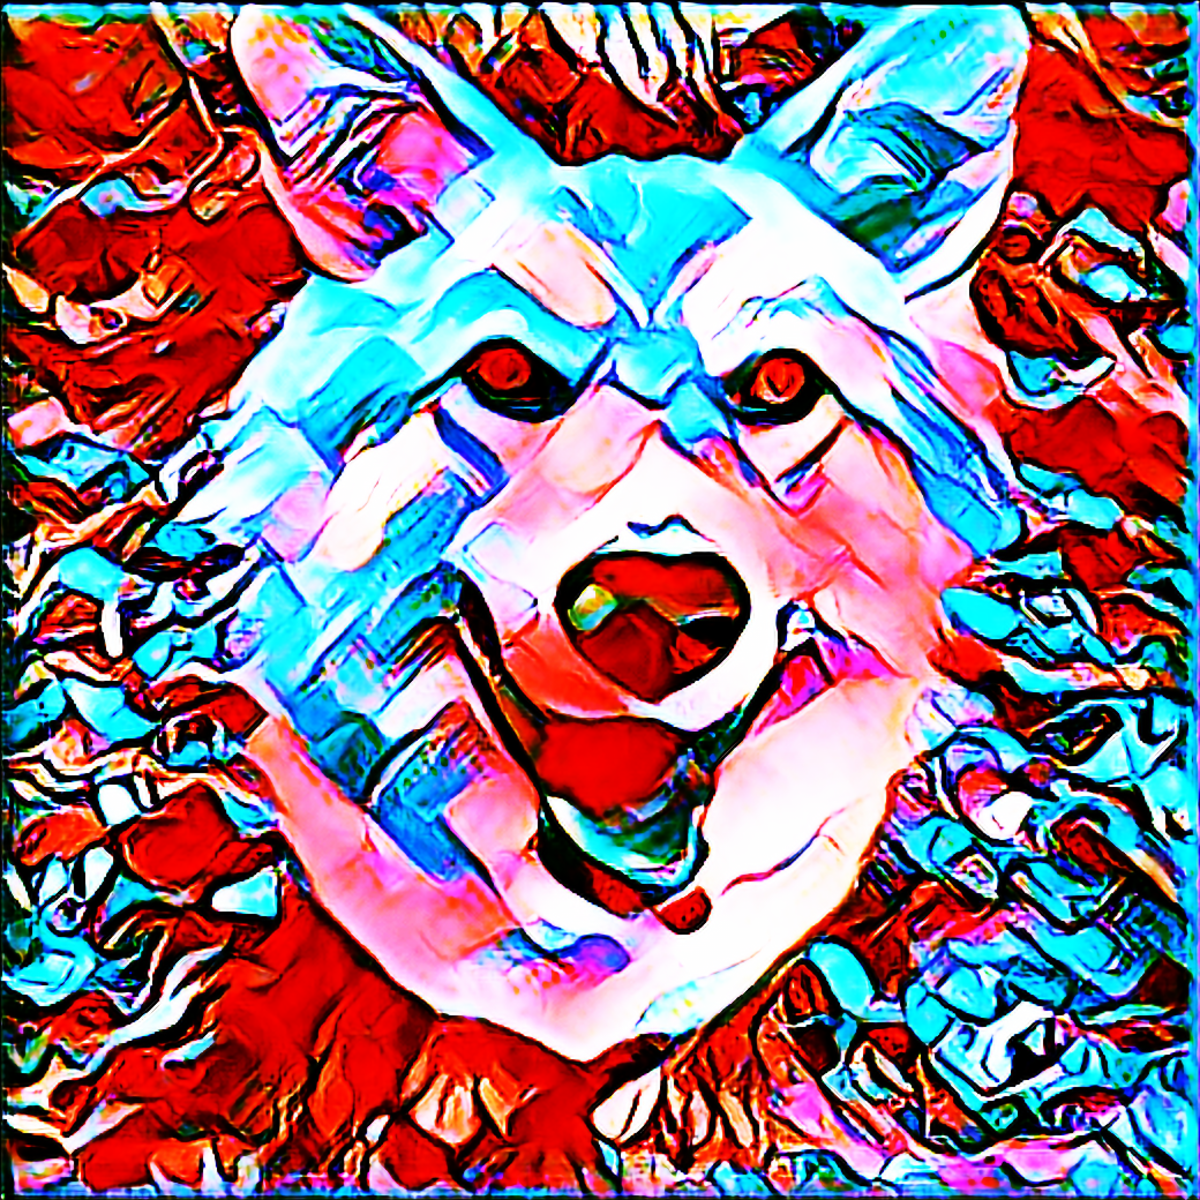 Photo to abstract realism art using AI style transfer.